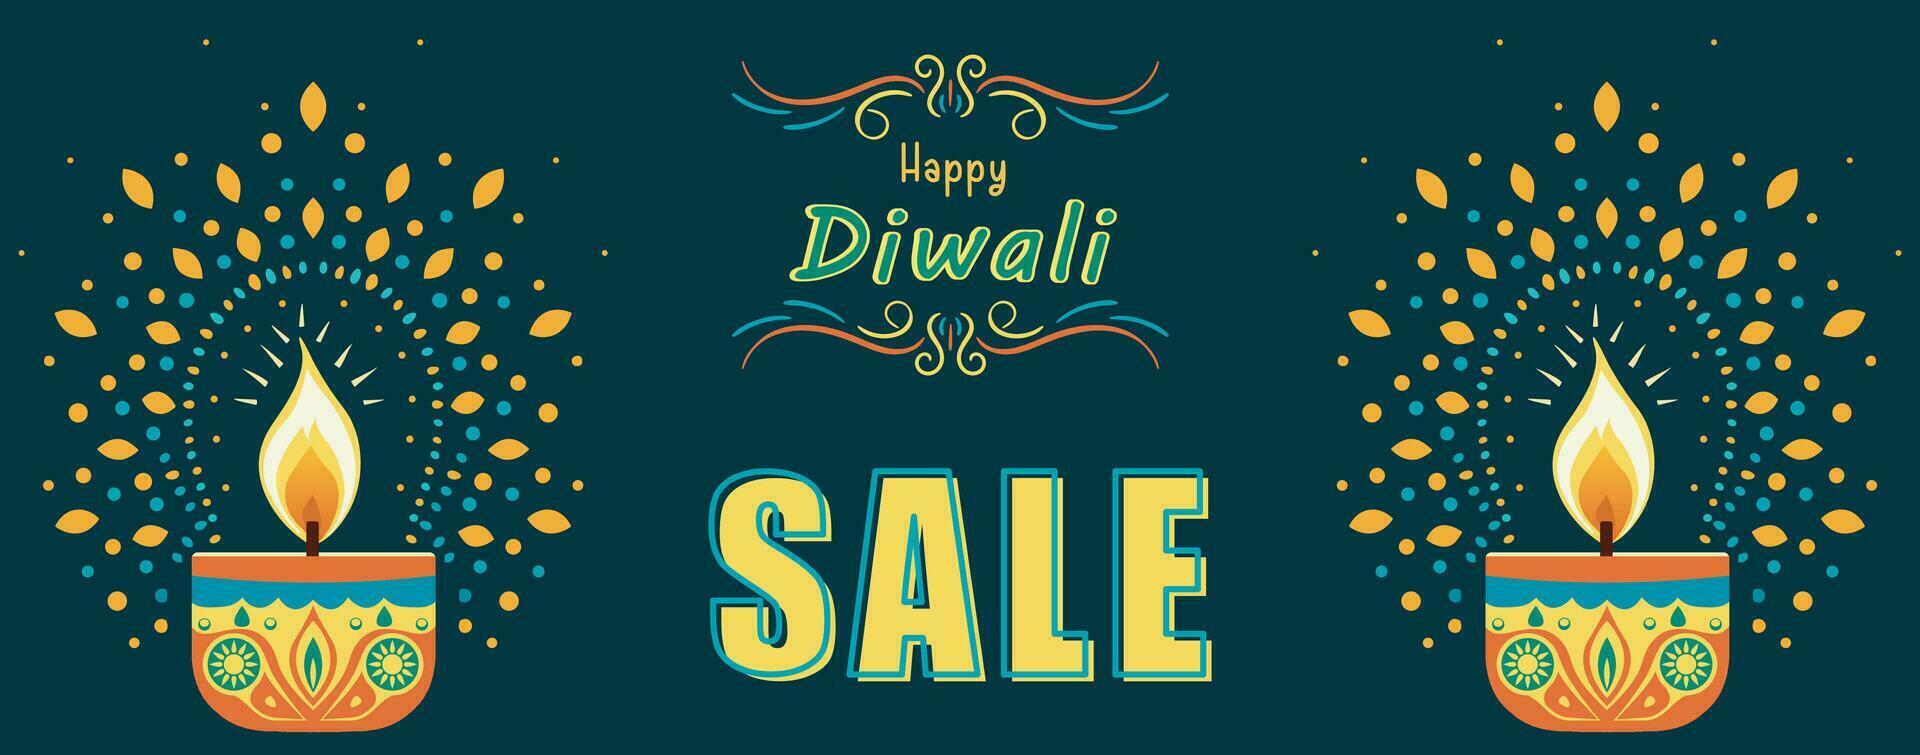 Happy Diwali colorful background banner for advertisement, vector illustration of Happy Diwali Hindu festival modern design, greeting card, special offer and sale, flat design